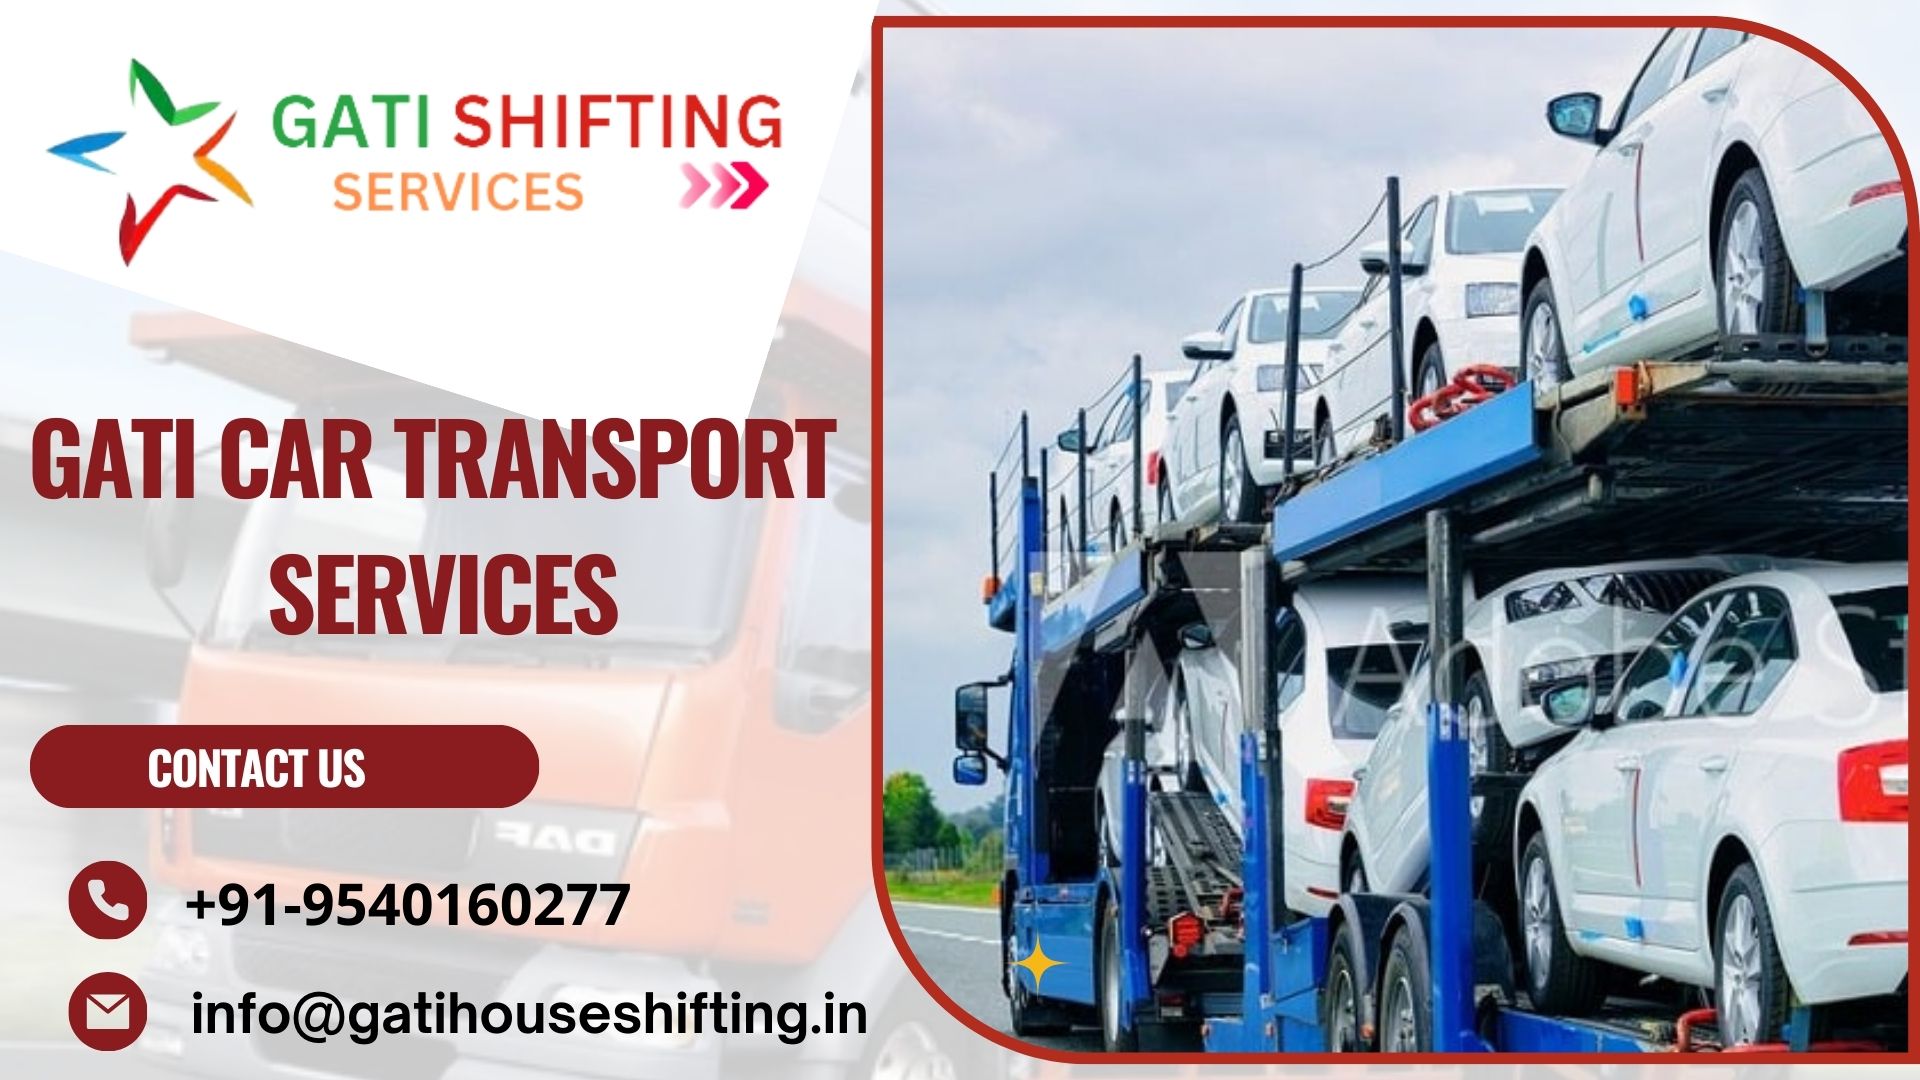 Car transport services from Delhi to Indore